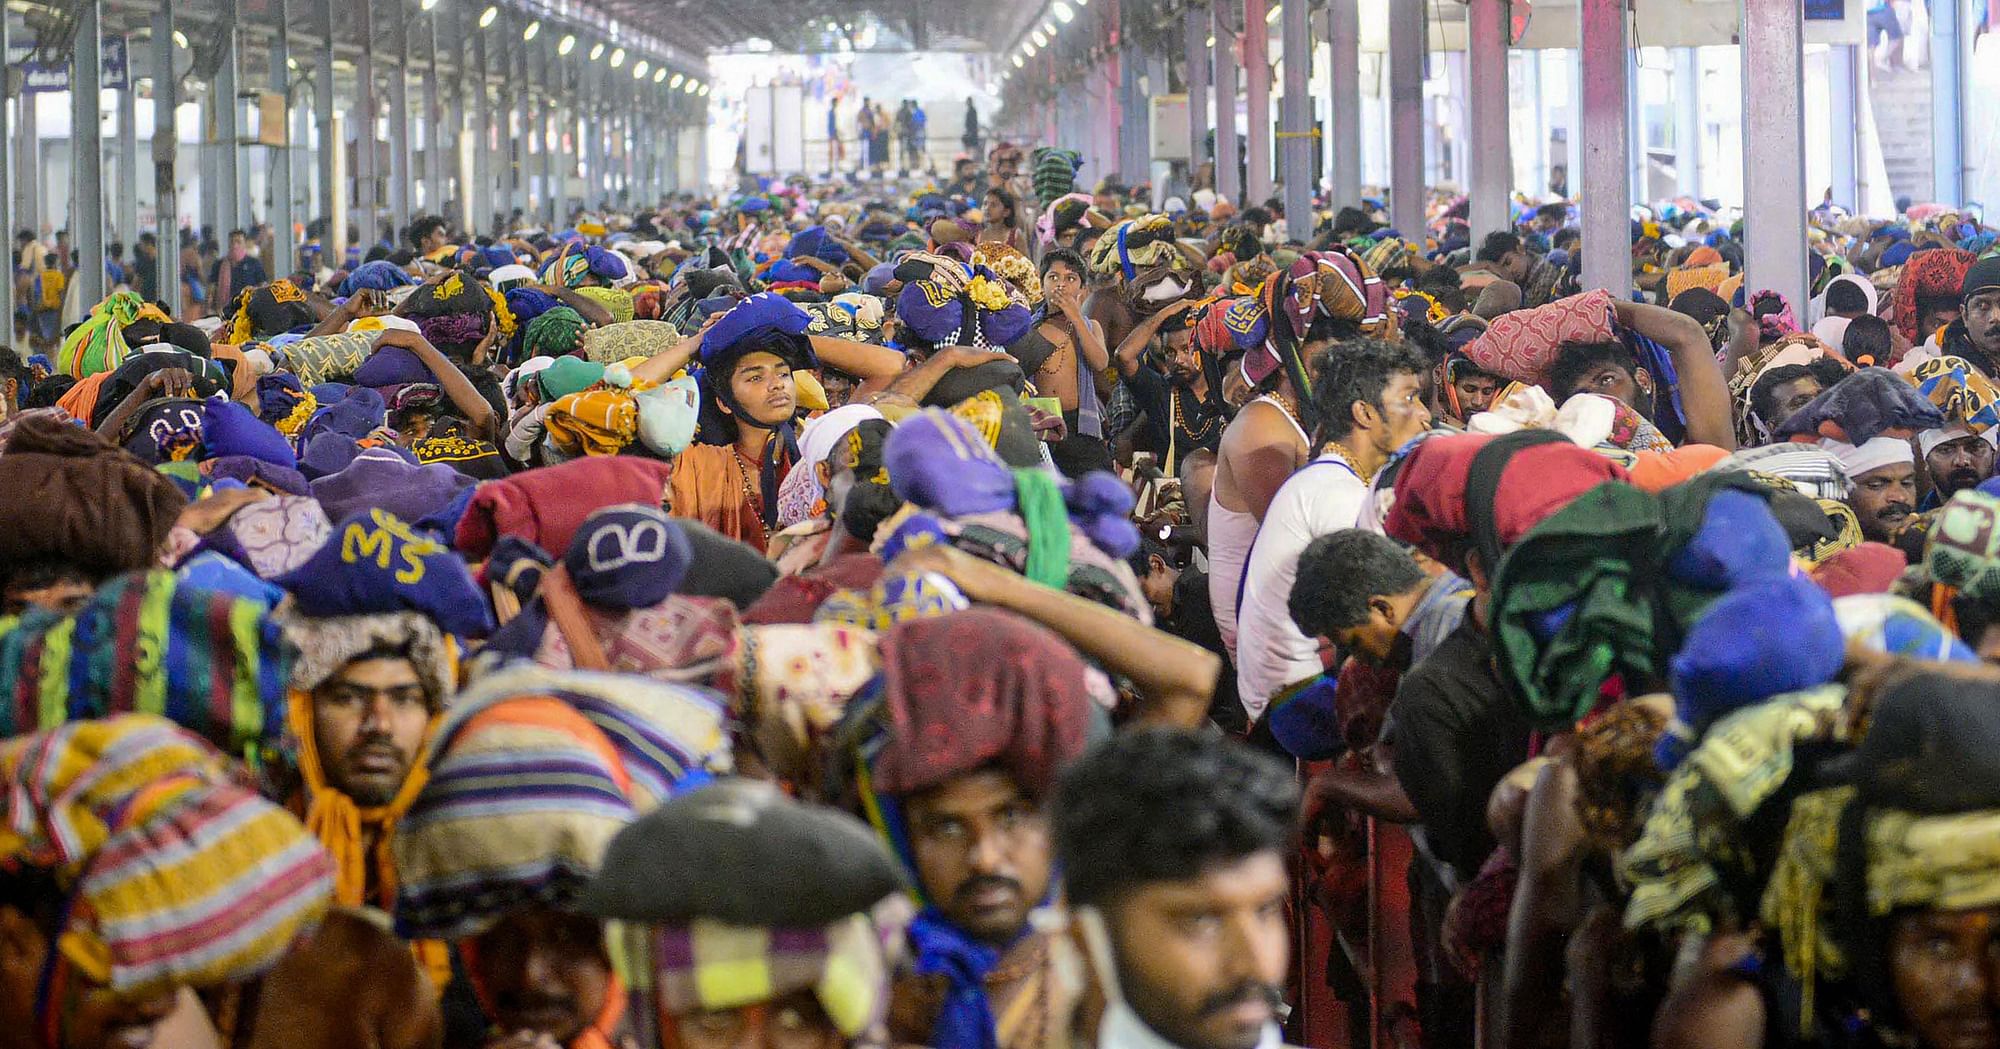  Devotees queue to offer prayers at Lord Ayyappa temple in Sabarimala on 24 December 2018. Image used for representation purposes only.